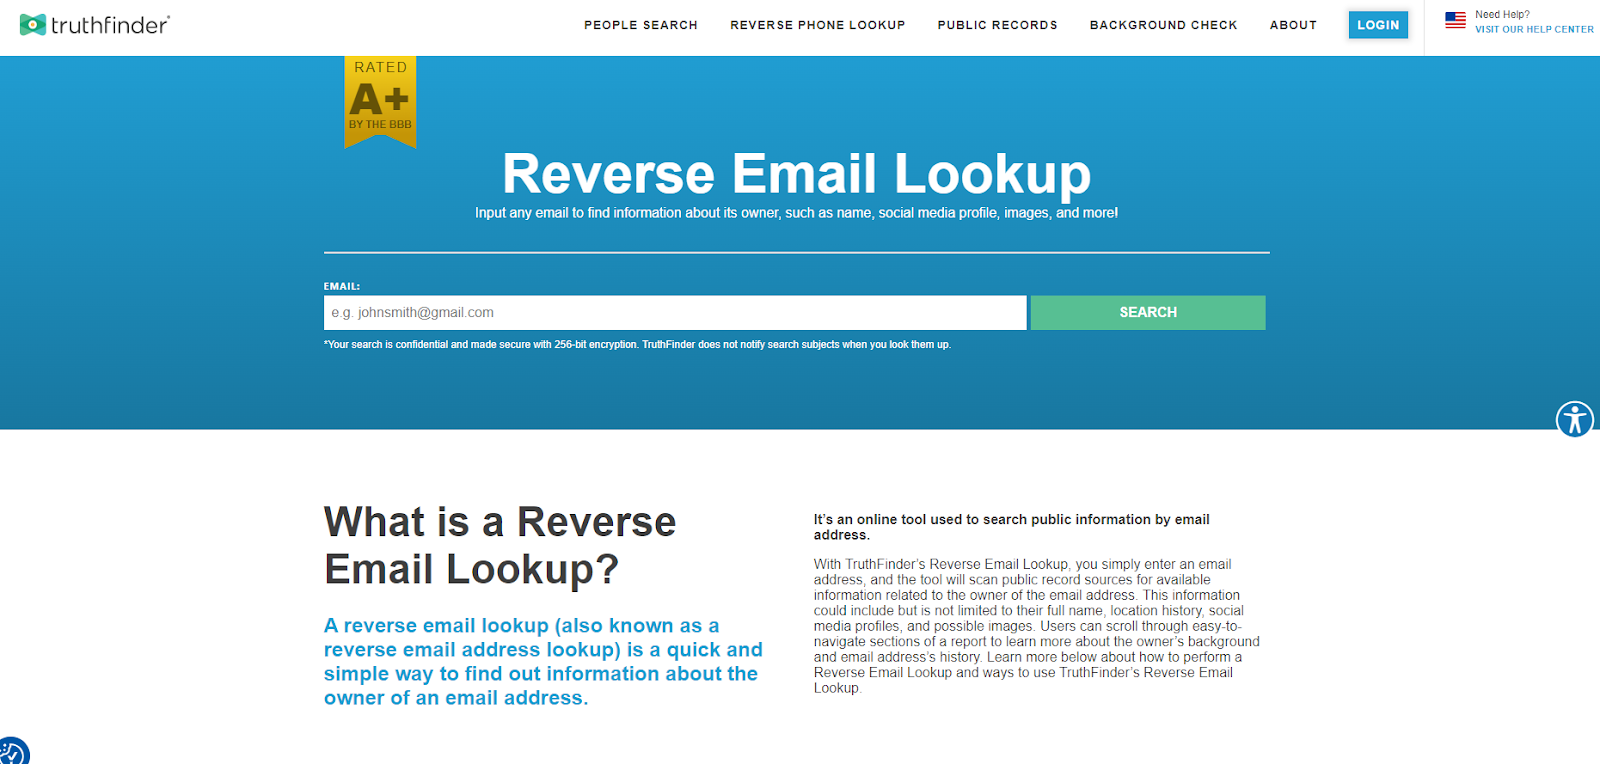 Best Reverse Email Lookup Tools: TruthFinder